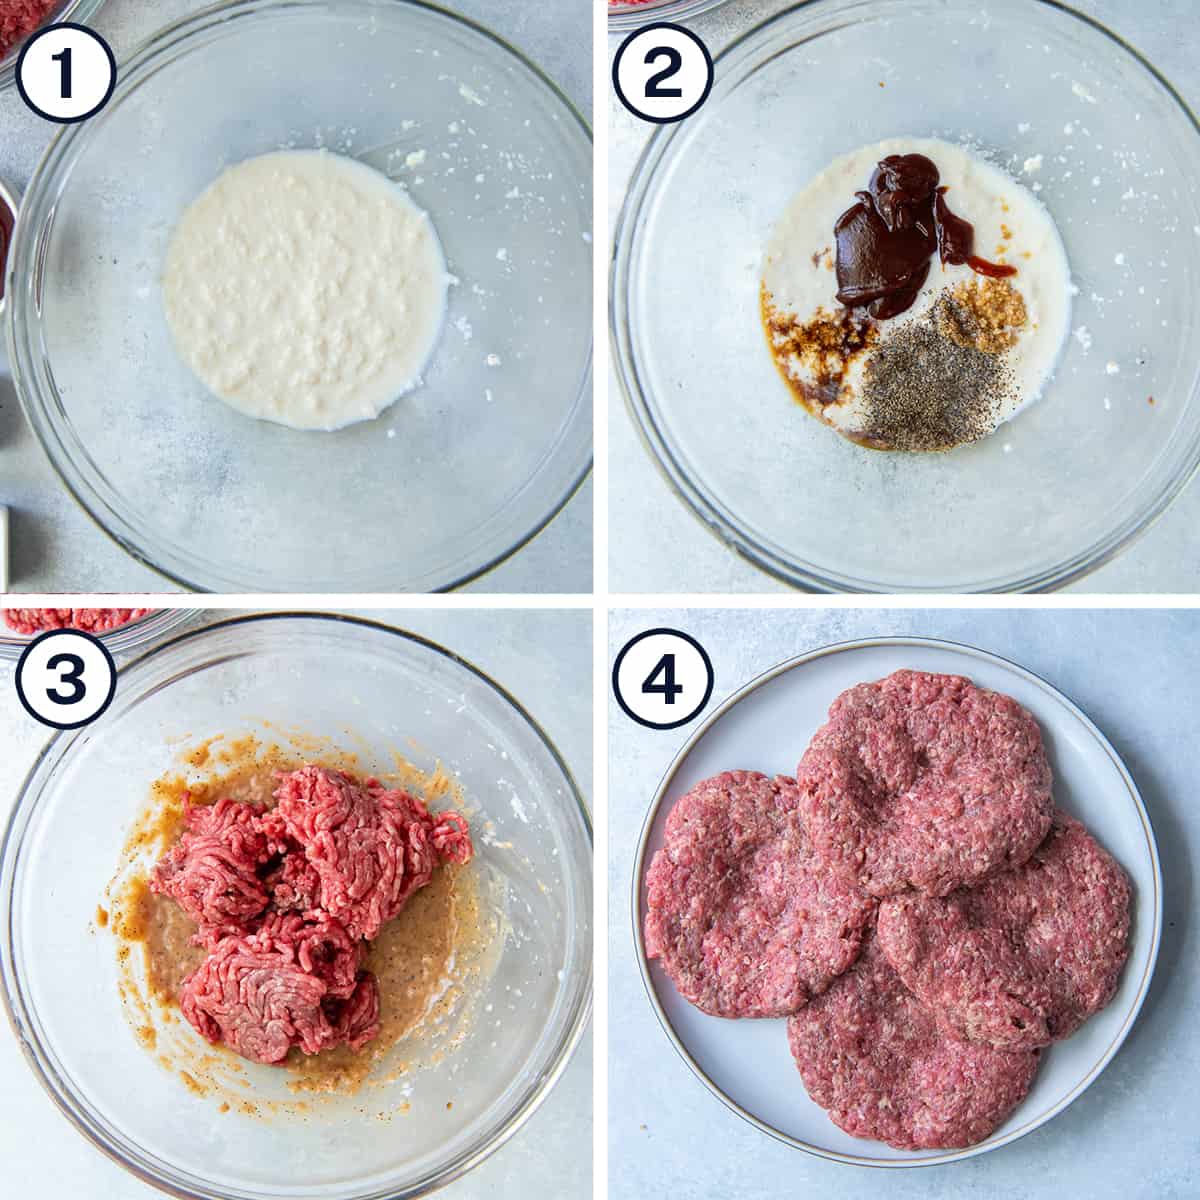 Bread, milk, bbq sauce, and ground beef are combined to make hamburger patties.